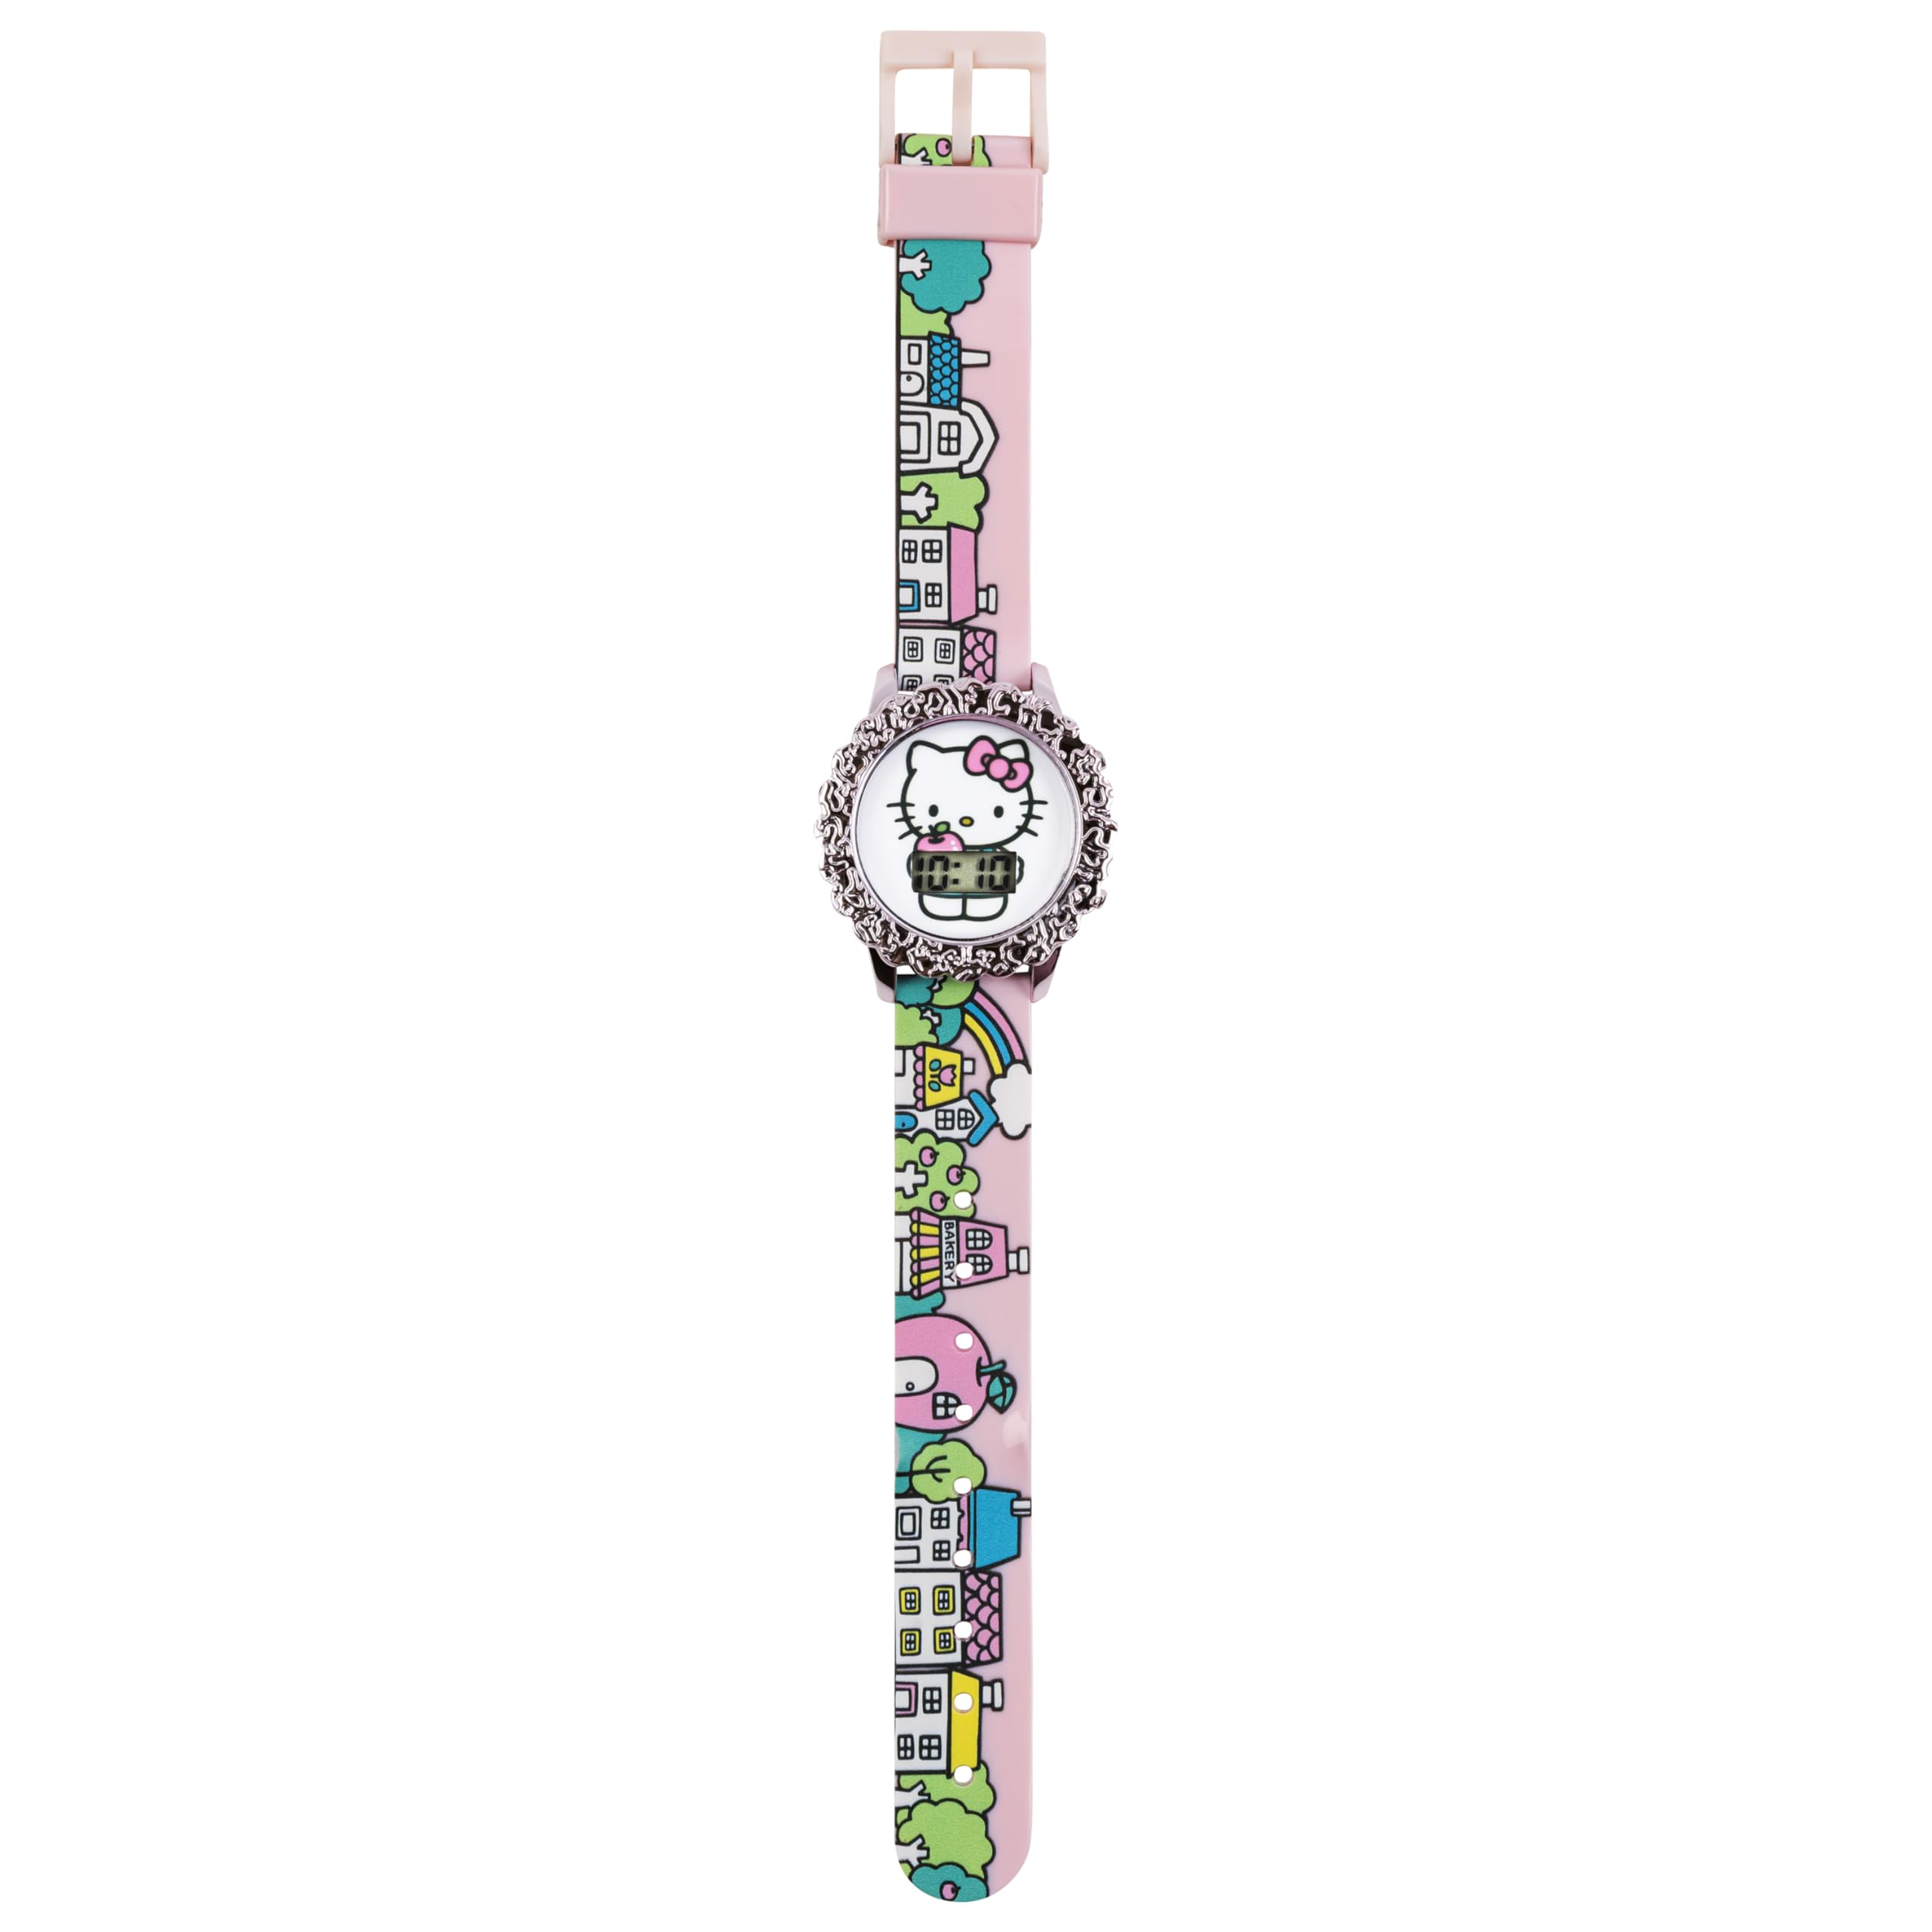 Accutime Hello Kitty Digital LCD Quartz Kids Pink Watch for Girls with Hello Kitty and Friends Pink Band Strap (Model: HK4195AZ)